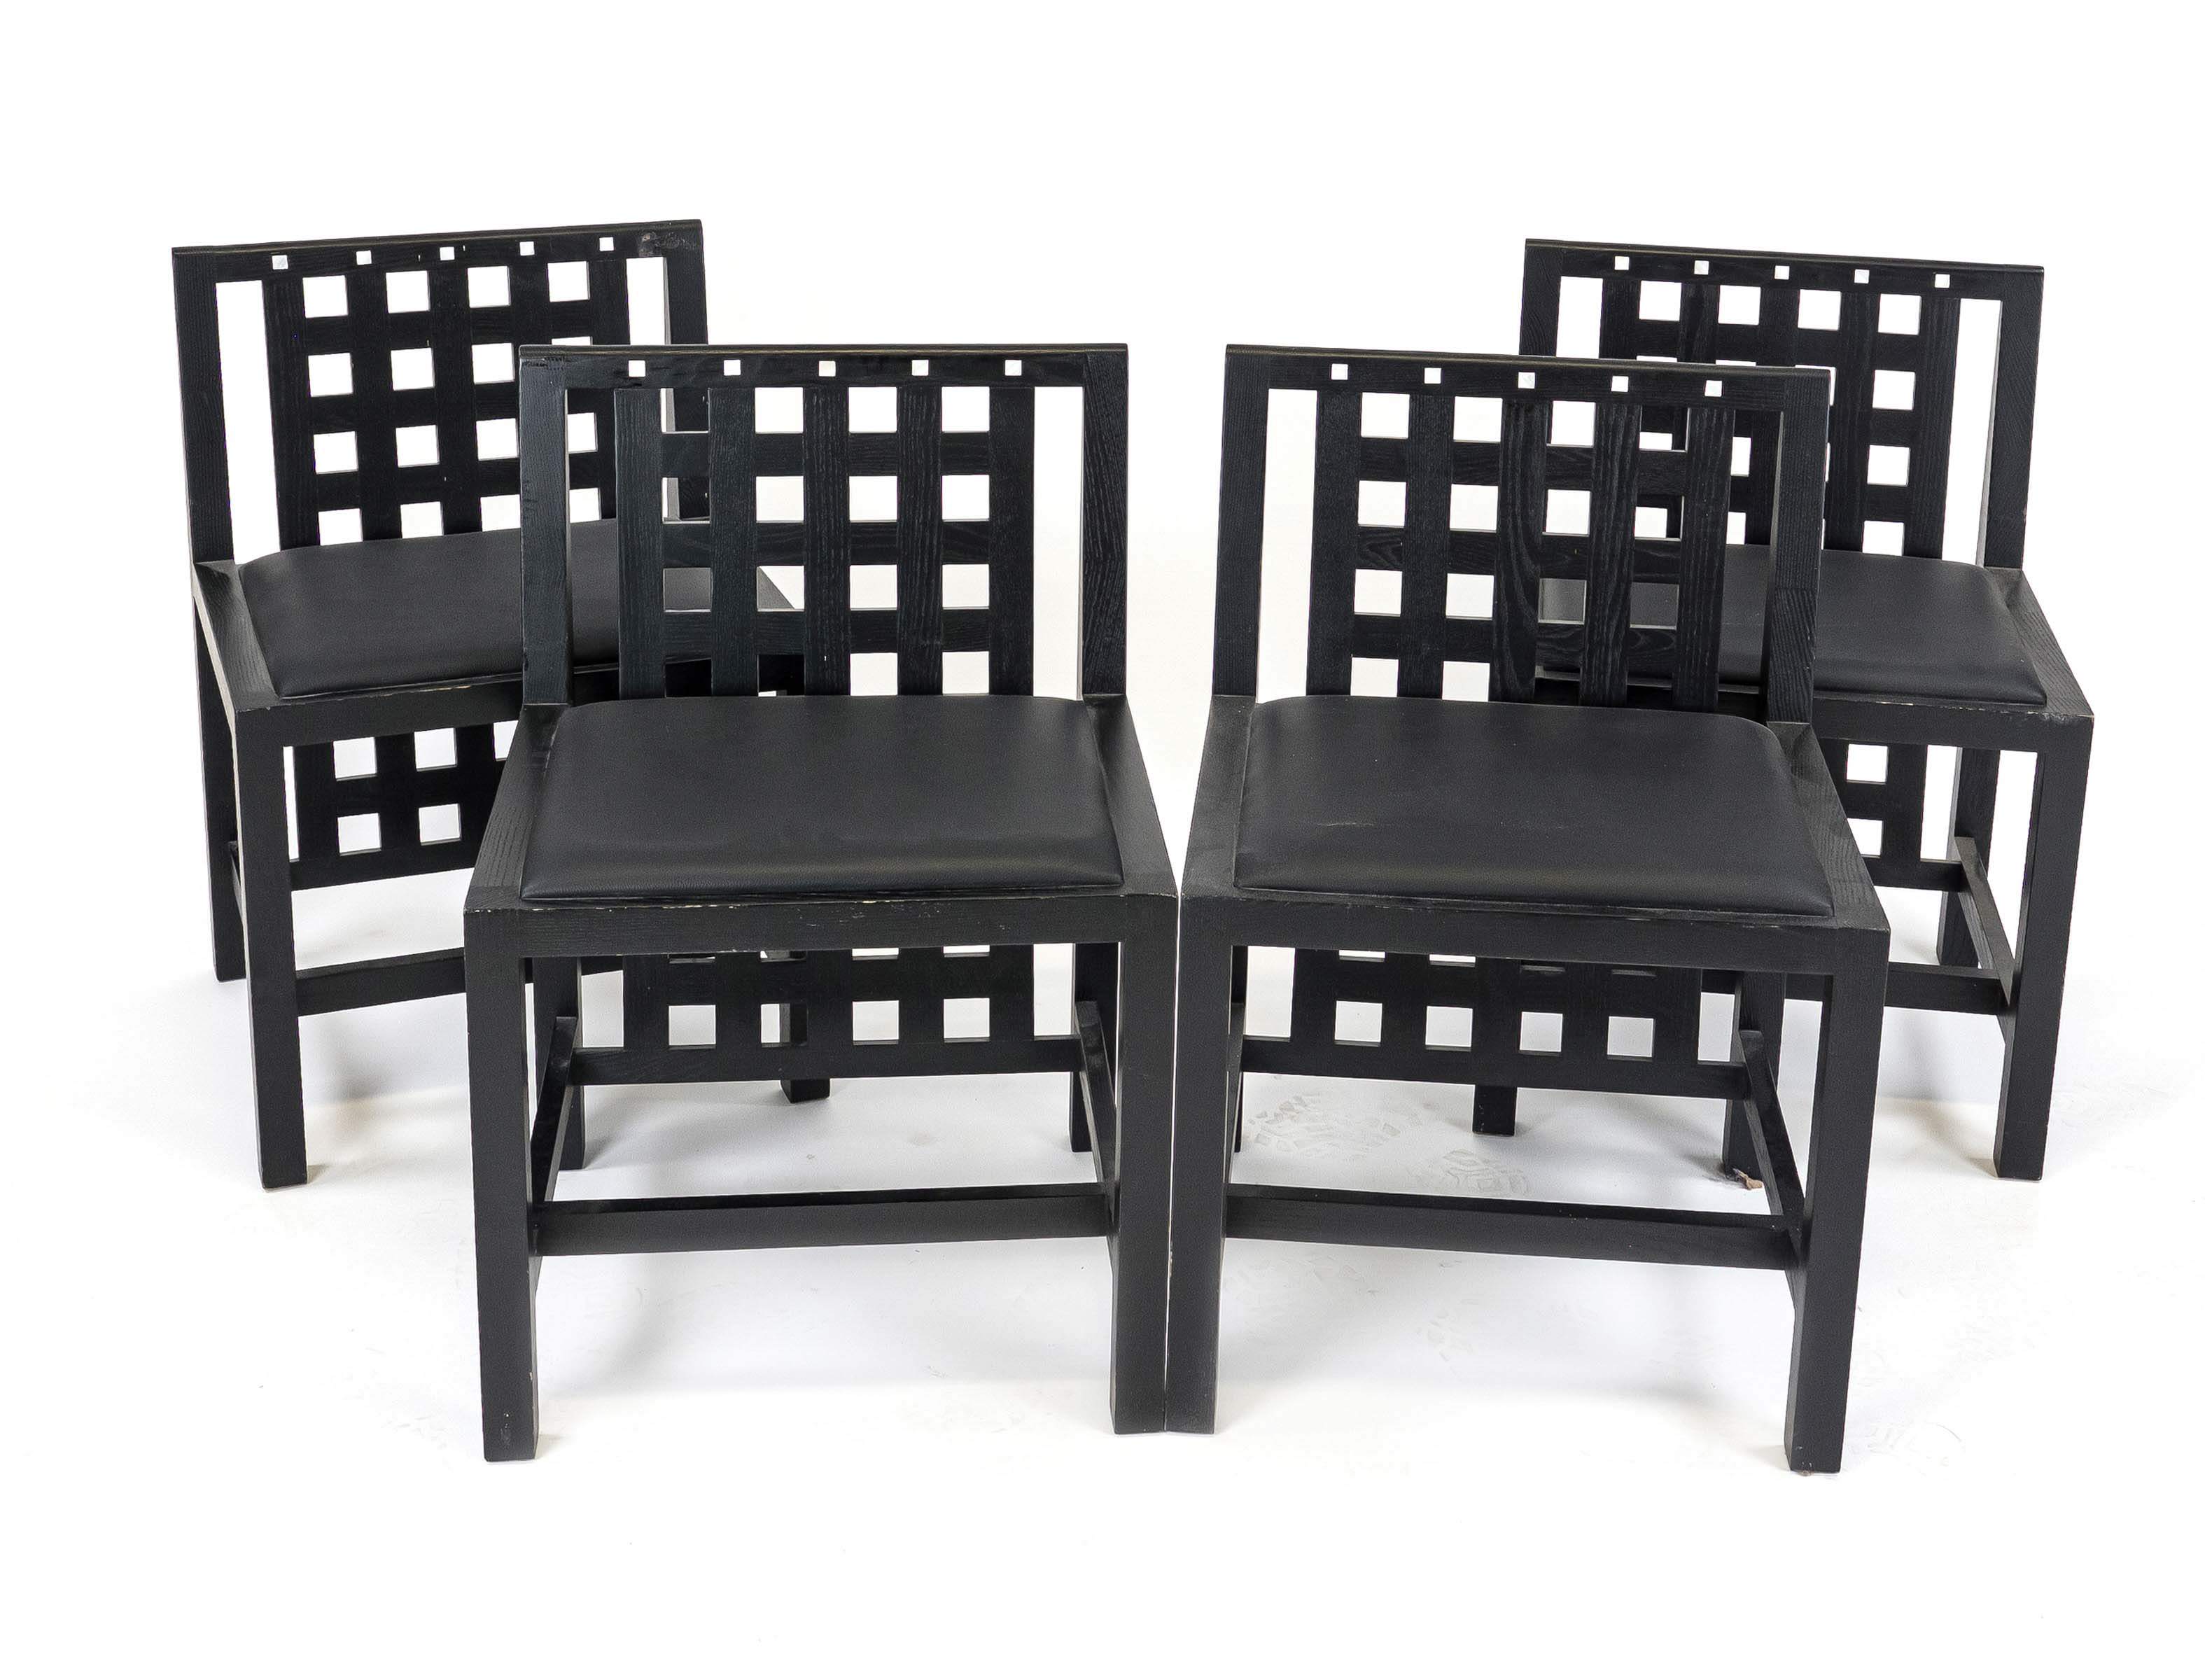 4 designer chairs, 2nd half 20th century, black lacquered wood with mother-of-pearl inlays,